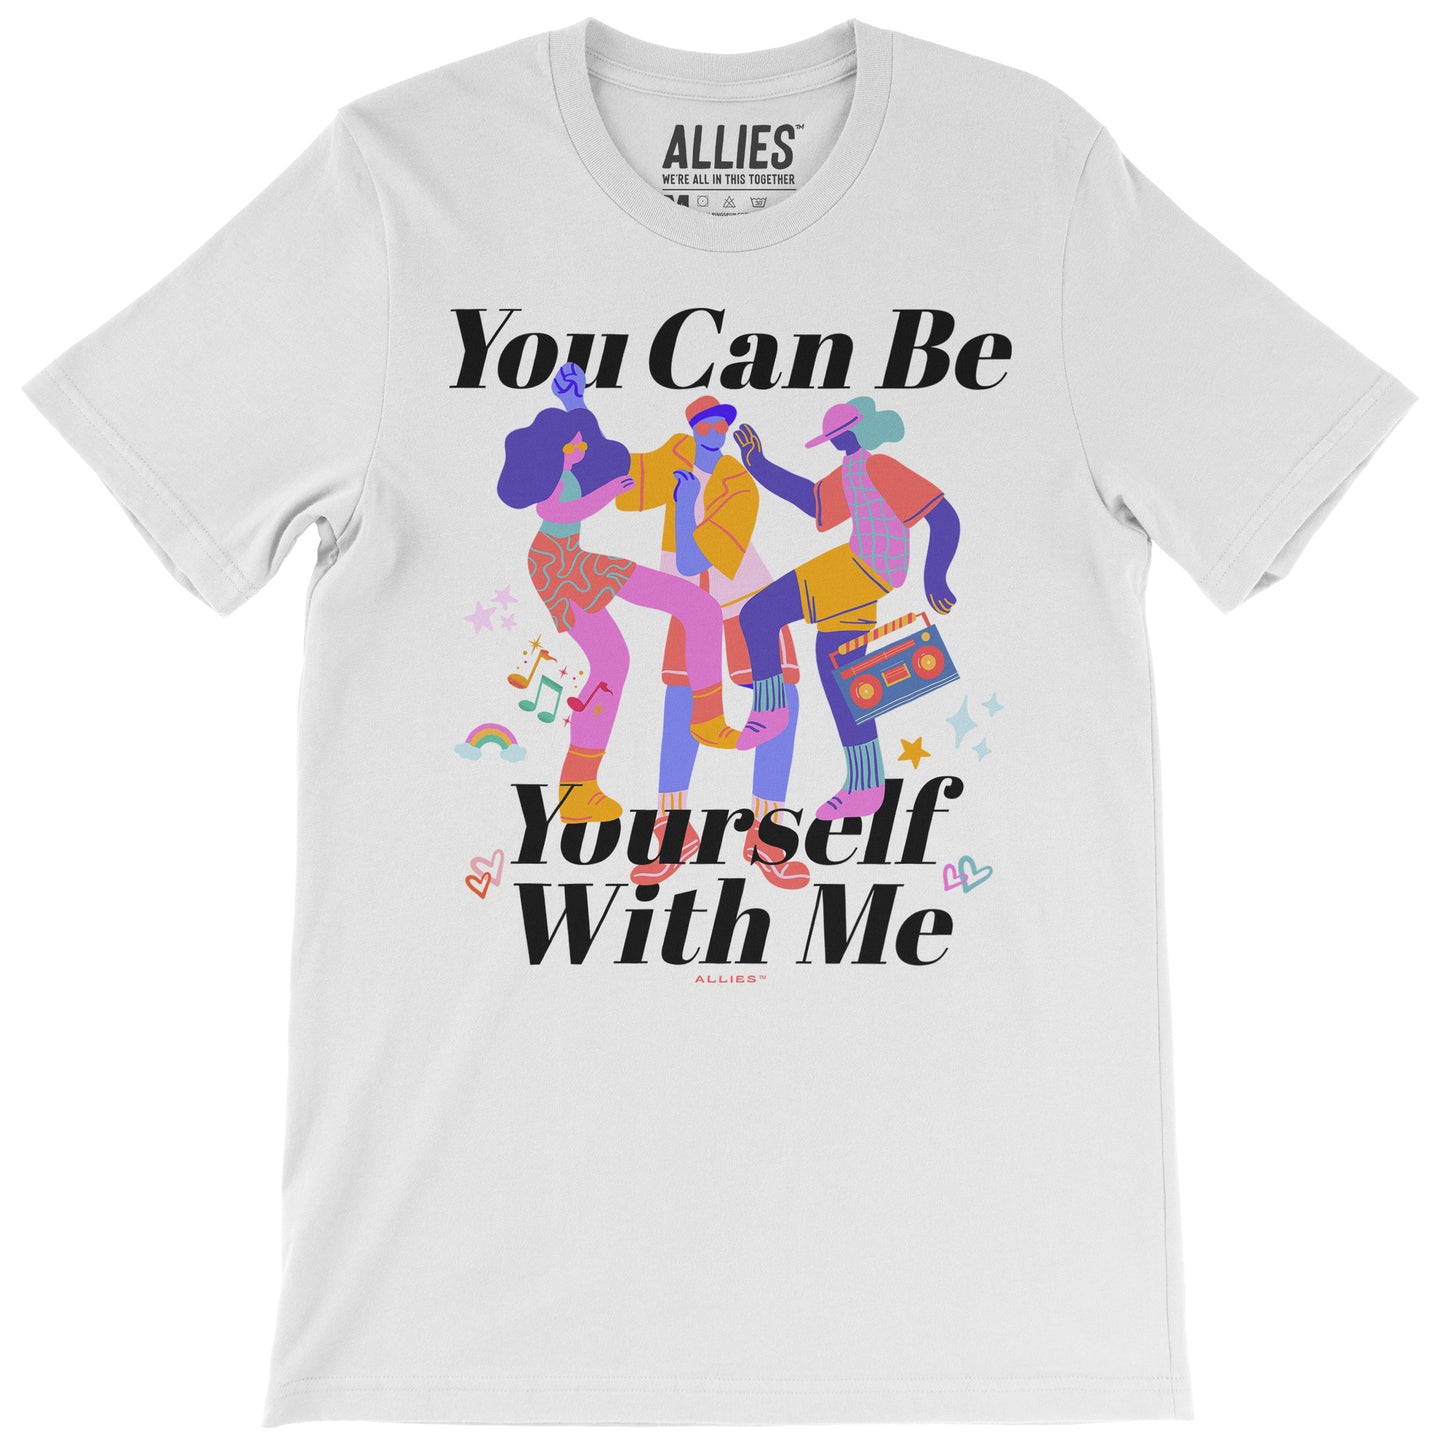 Be Yourself T-shirt